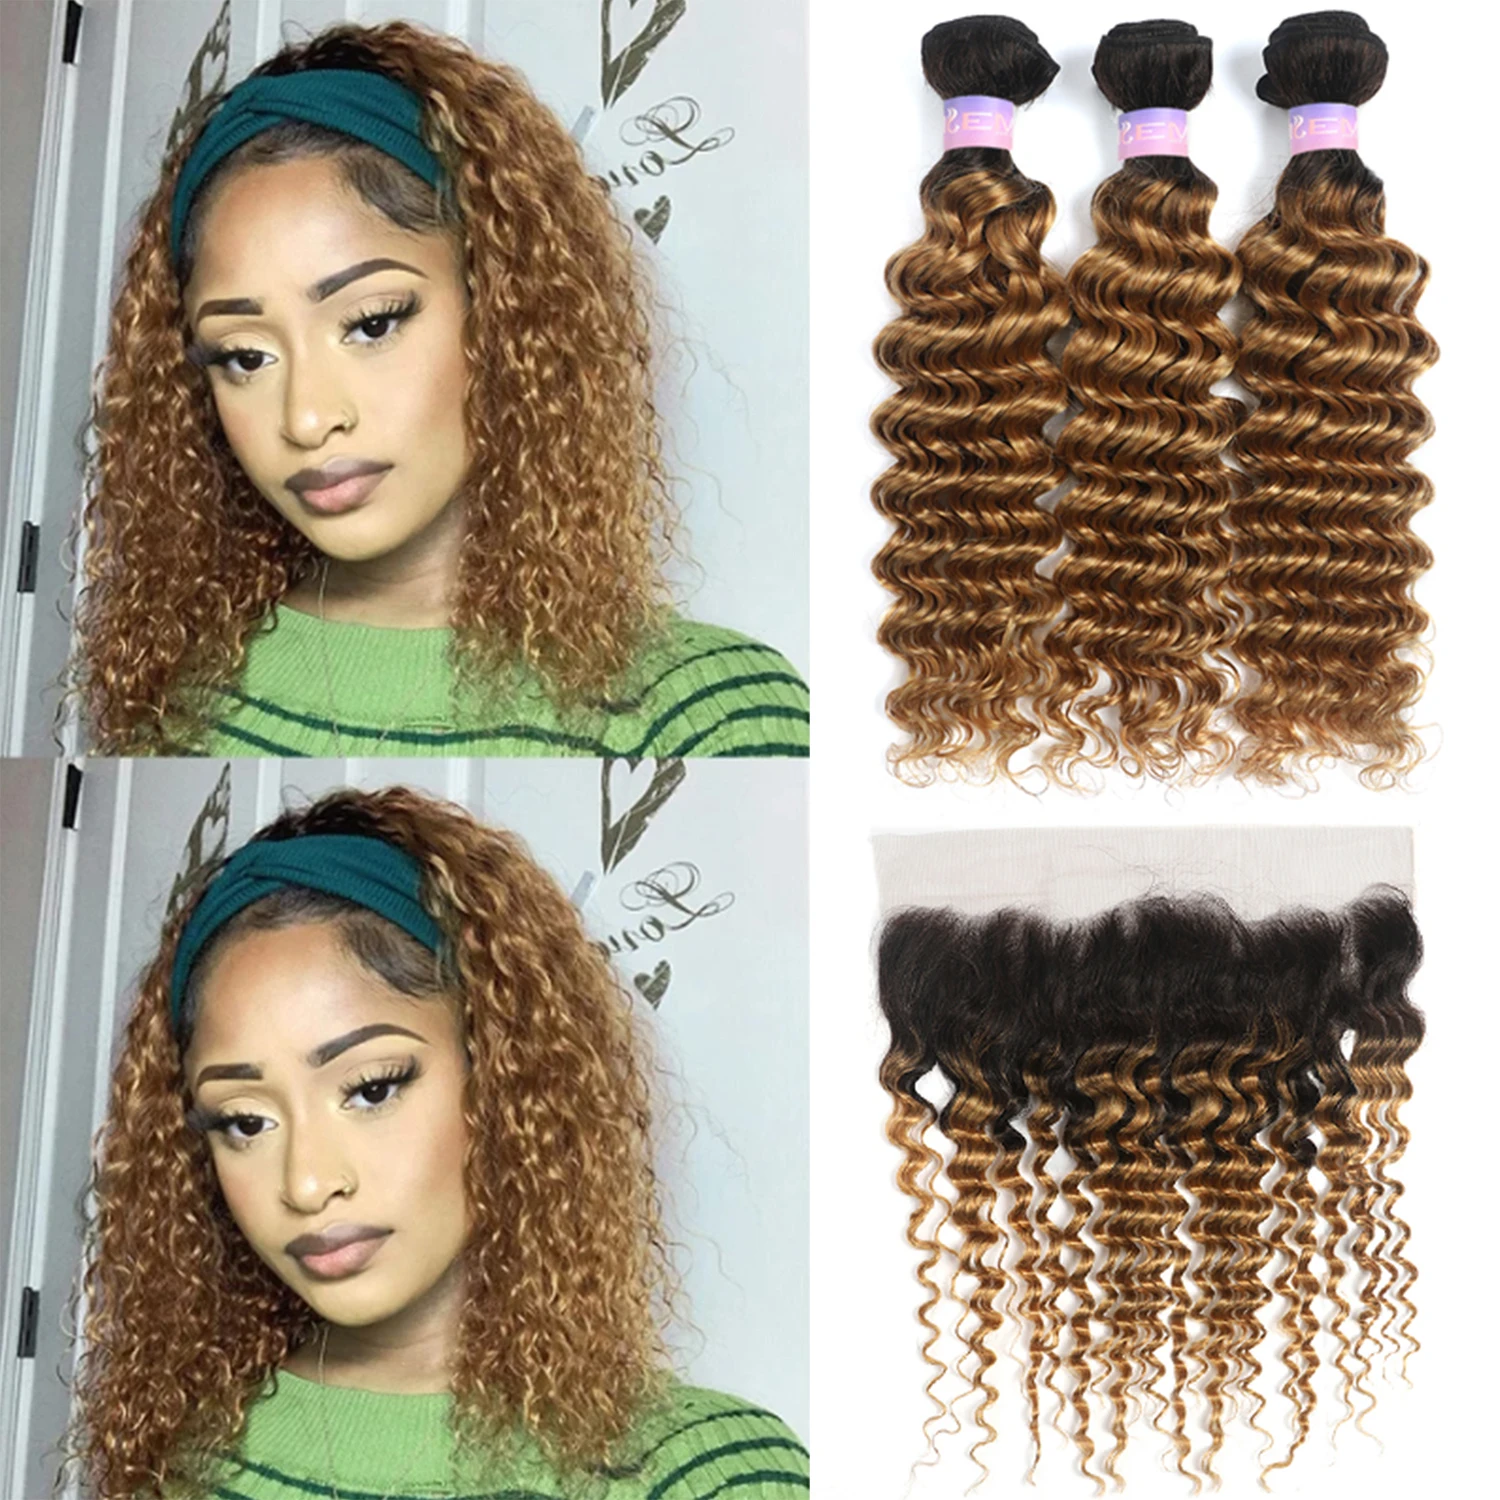 Deep Wave Bundles With Frontal 13x4 Ombre Blonde Colored Hair Bundles With Closure Brazilian Non-Remy Human Hair Weave Bundles